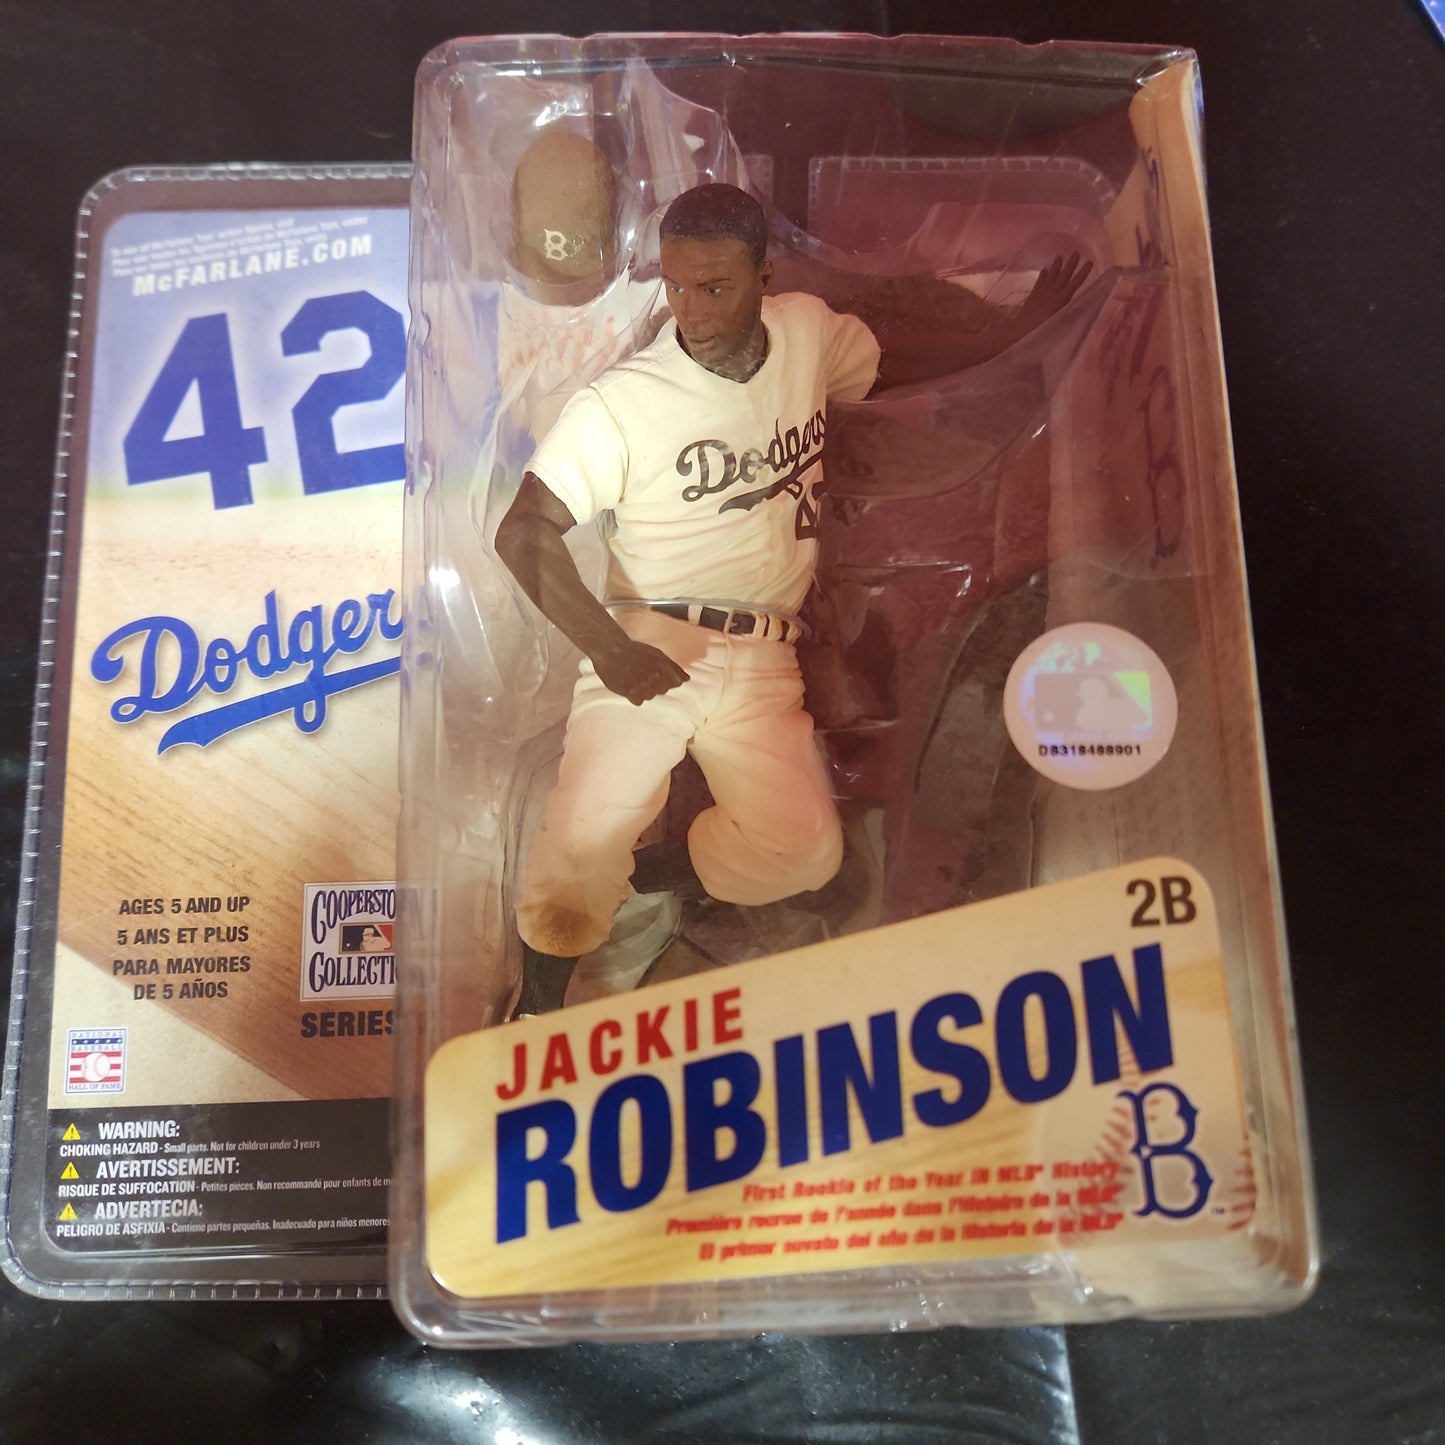 2006 McFarlane MLB Cooperstown Collection Series 3 JACKIE ROBINSON - Dodgers